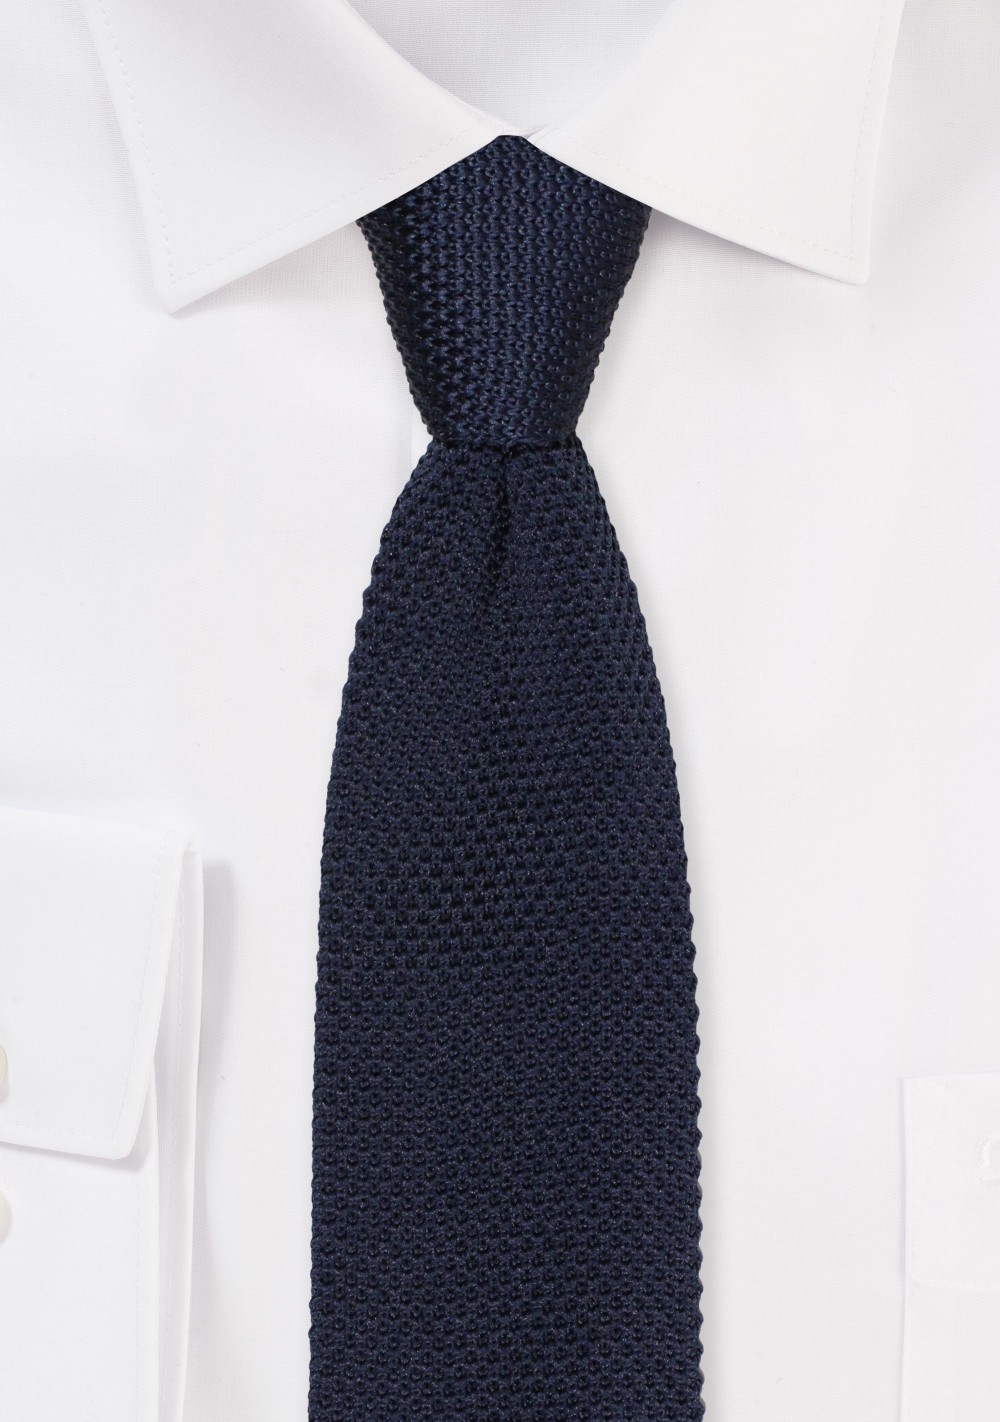 Navy Knit Tie with Pointed Tip